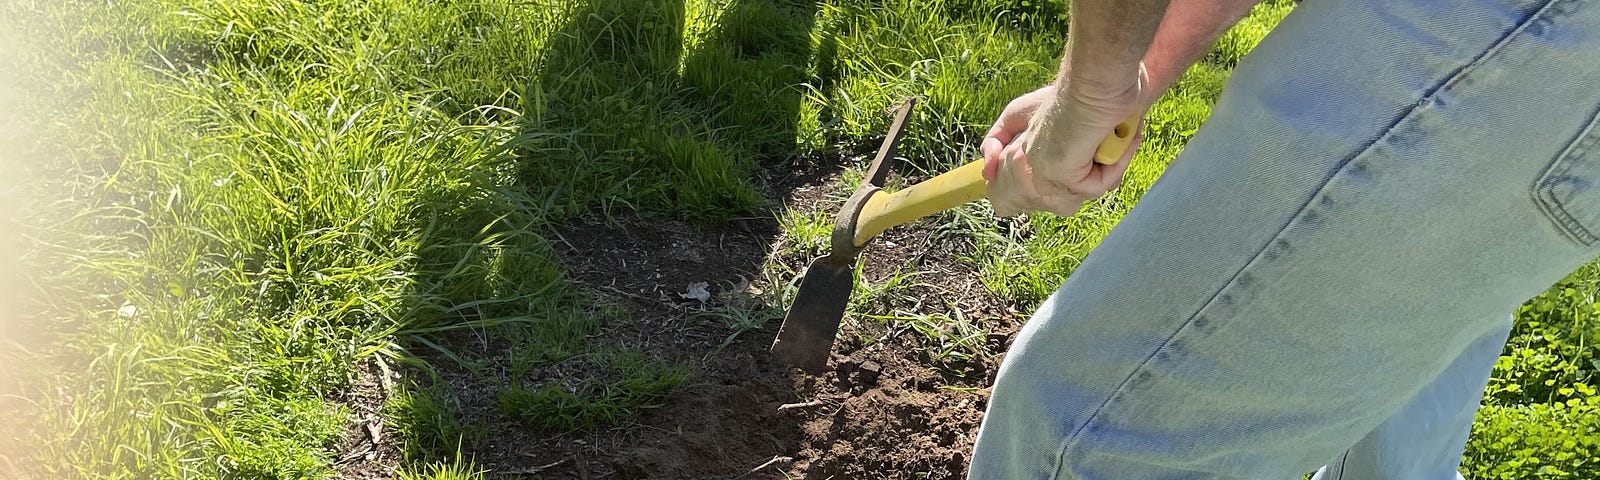 Author digging a hole with a shovel.